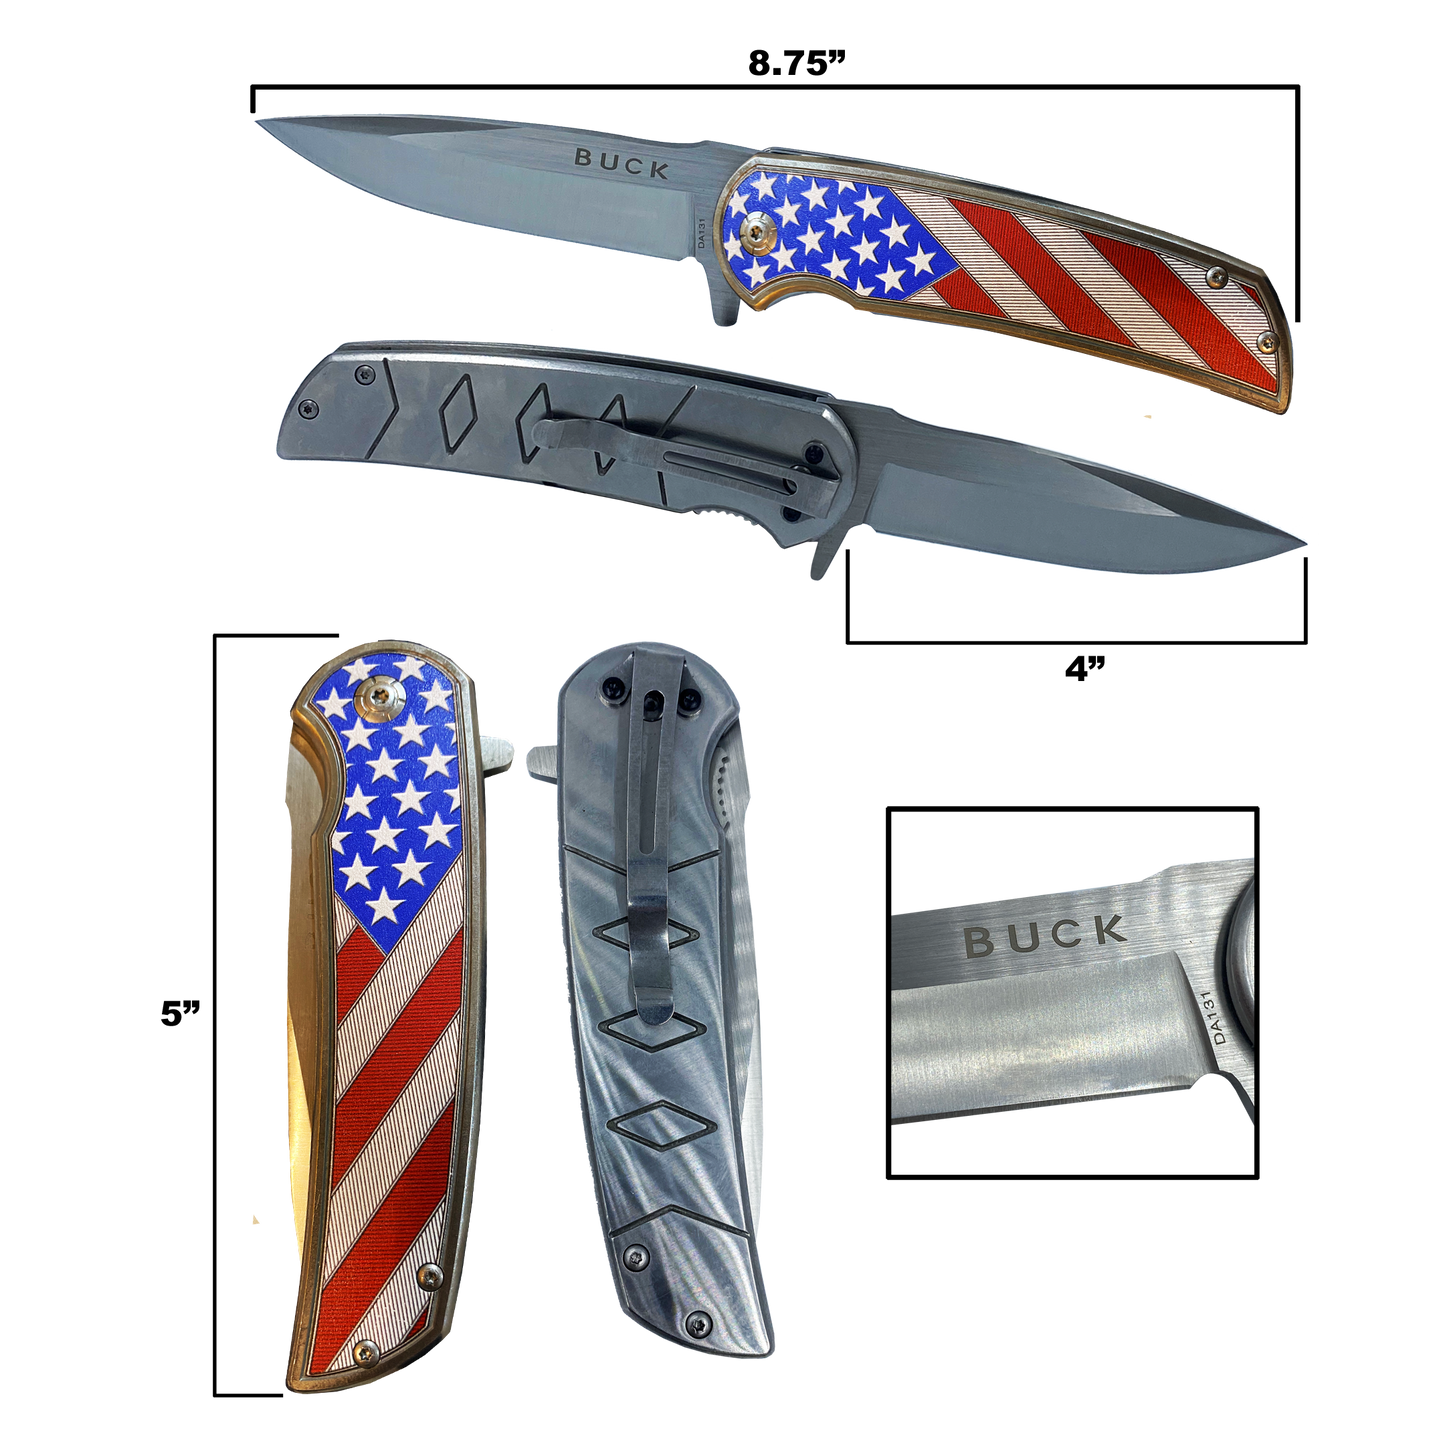 discontinued BL1-02 American Flag pocket tool Police Law Enforcement First Responder Rescue Tactical Survival Military Veteran USA